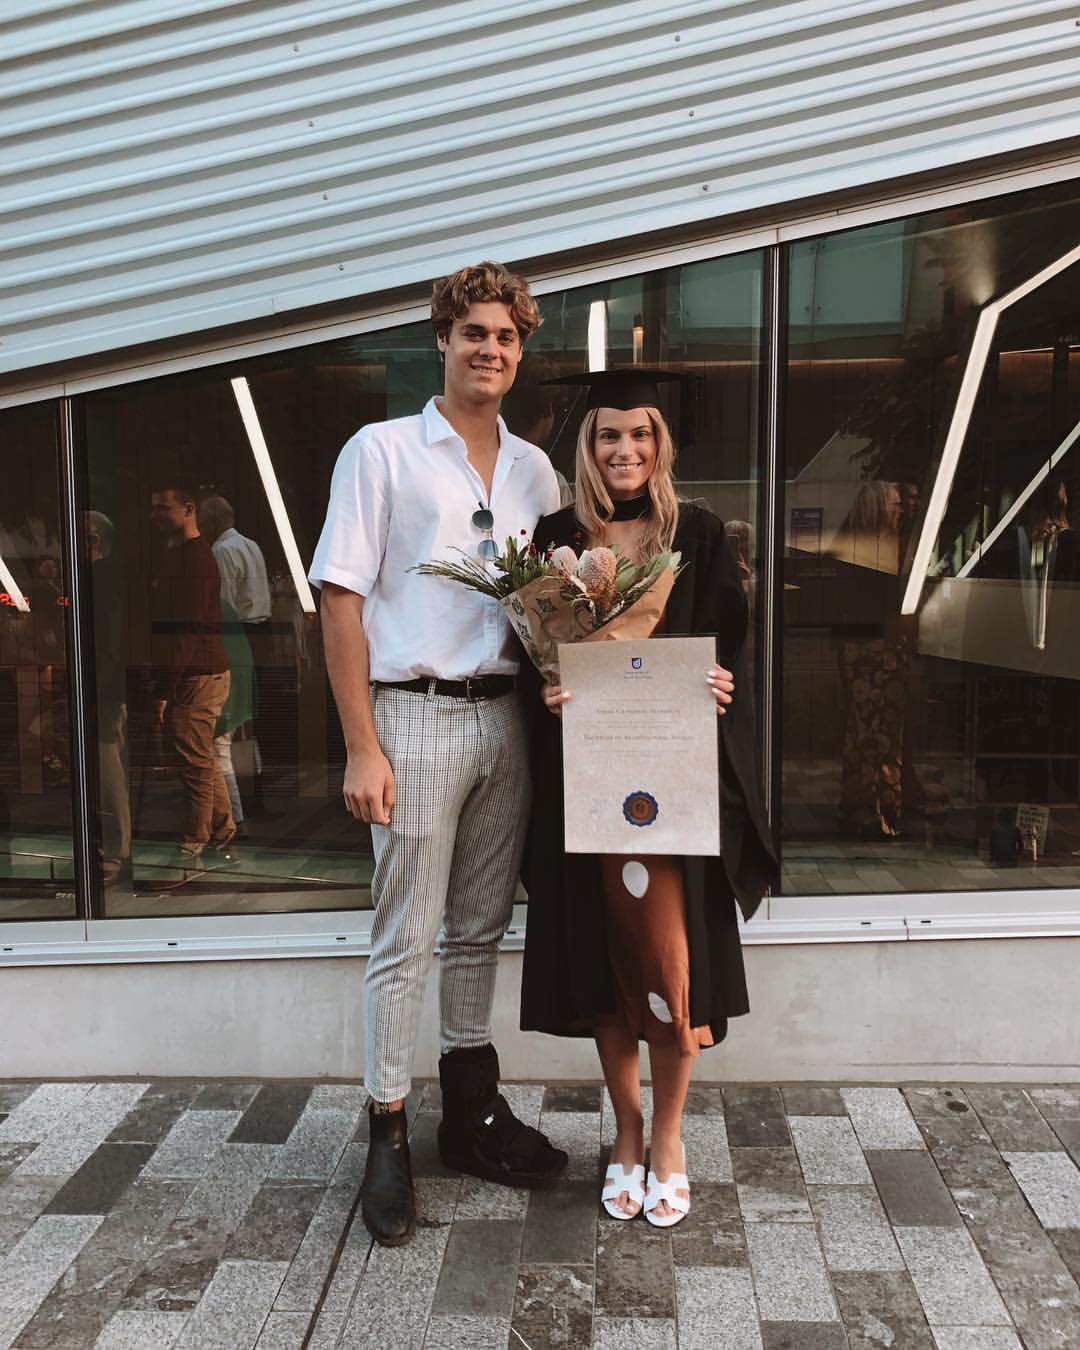 Spencer Johnson With His Girlfriend Sarah Petherick On Her Master's Graduation